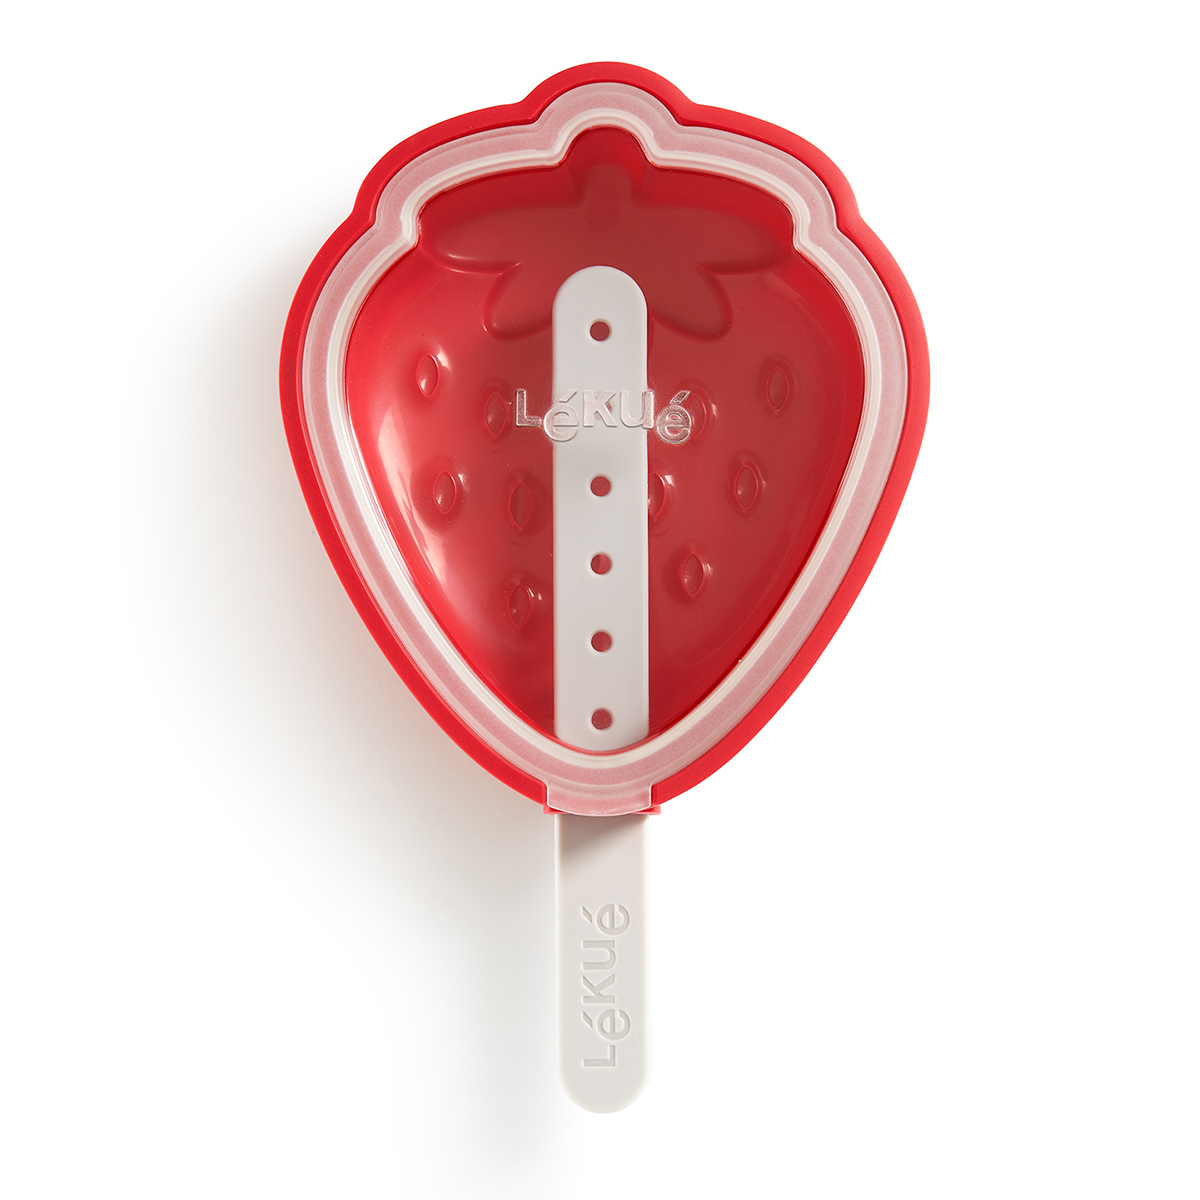 Lekue Strawberry Popsicle Mold - Red